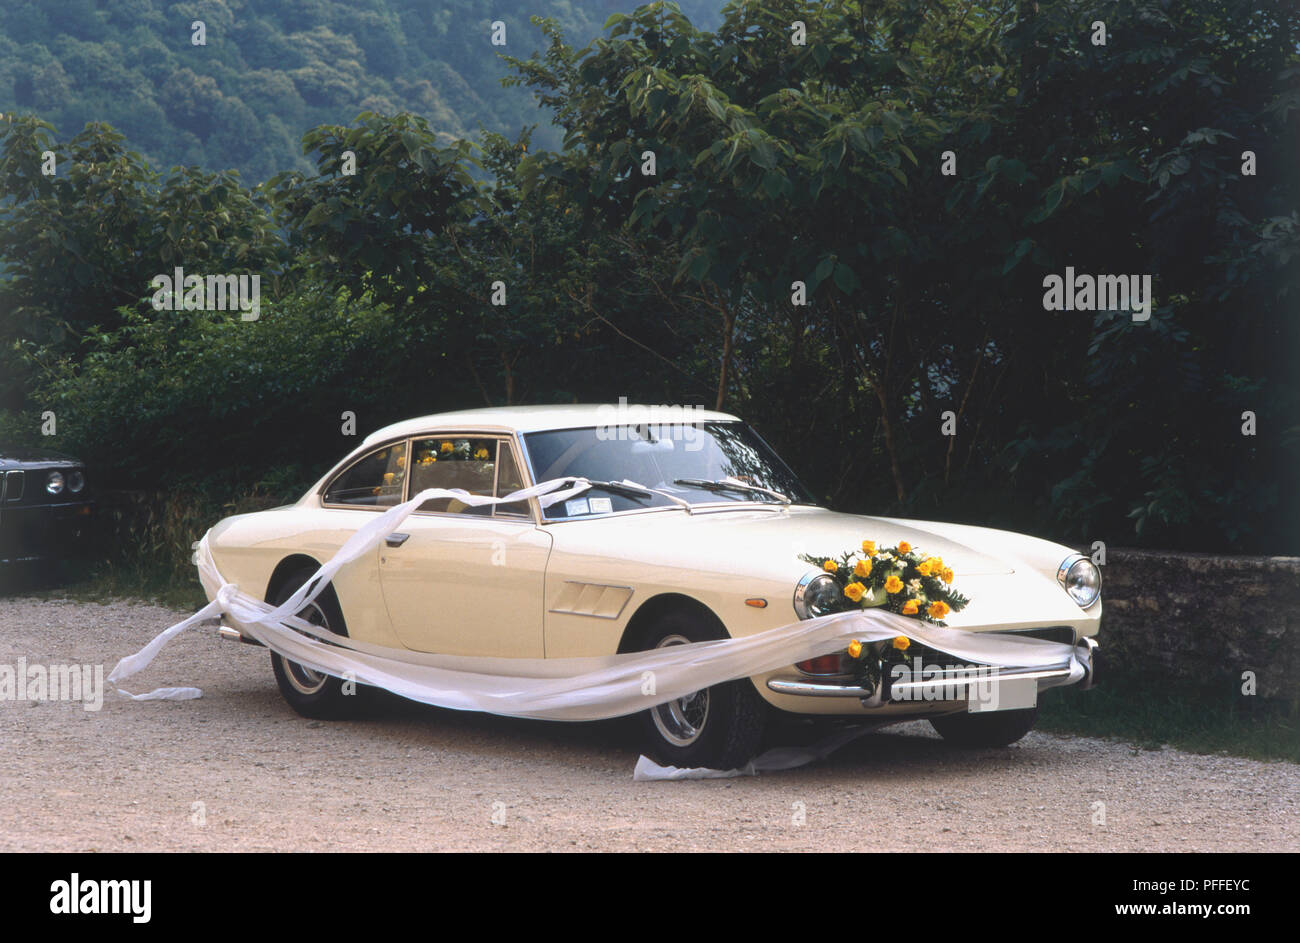 Vintage, cream-coloured Ferrari decorated for a wedding, with yellow flowers and white veil Stock Photo